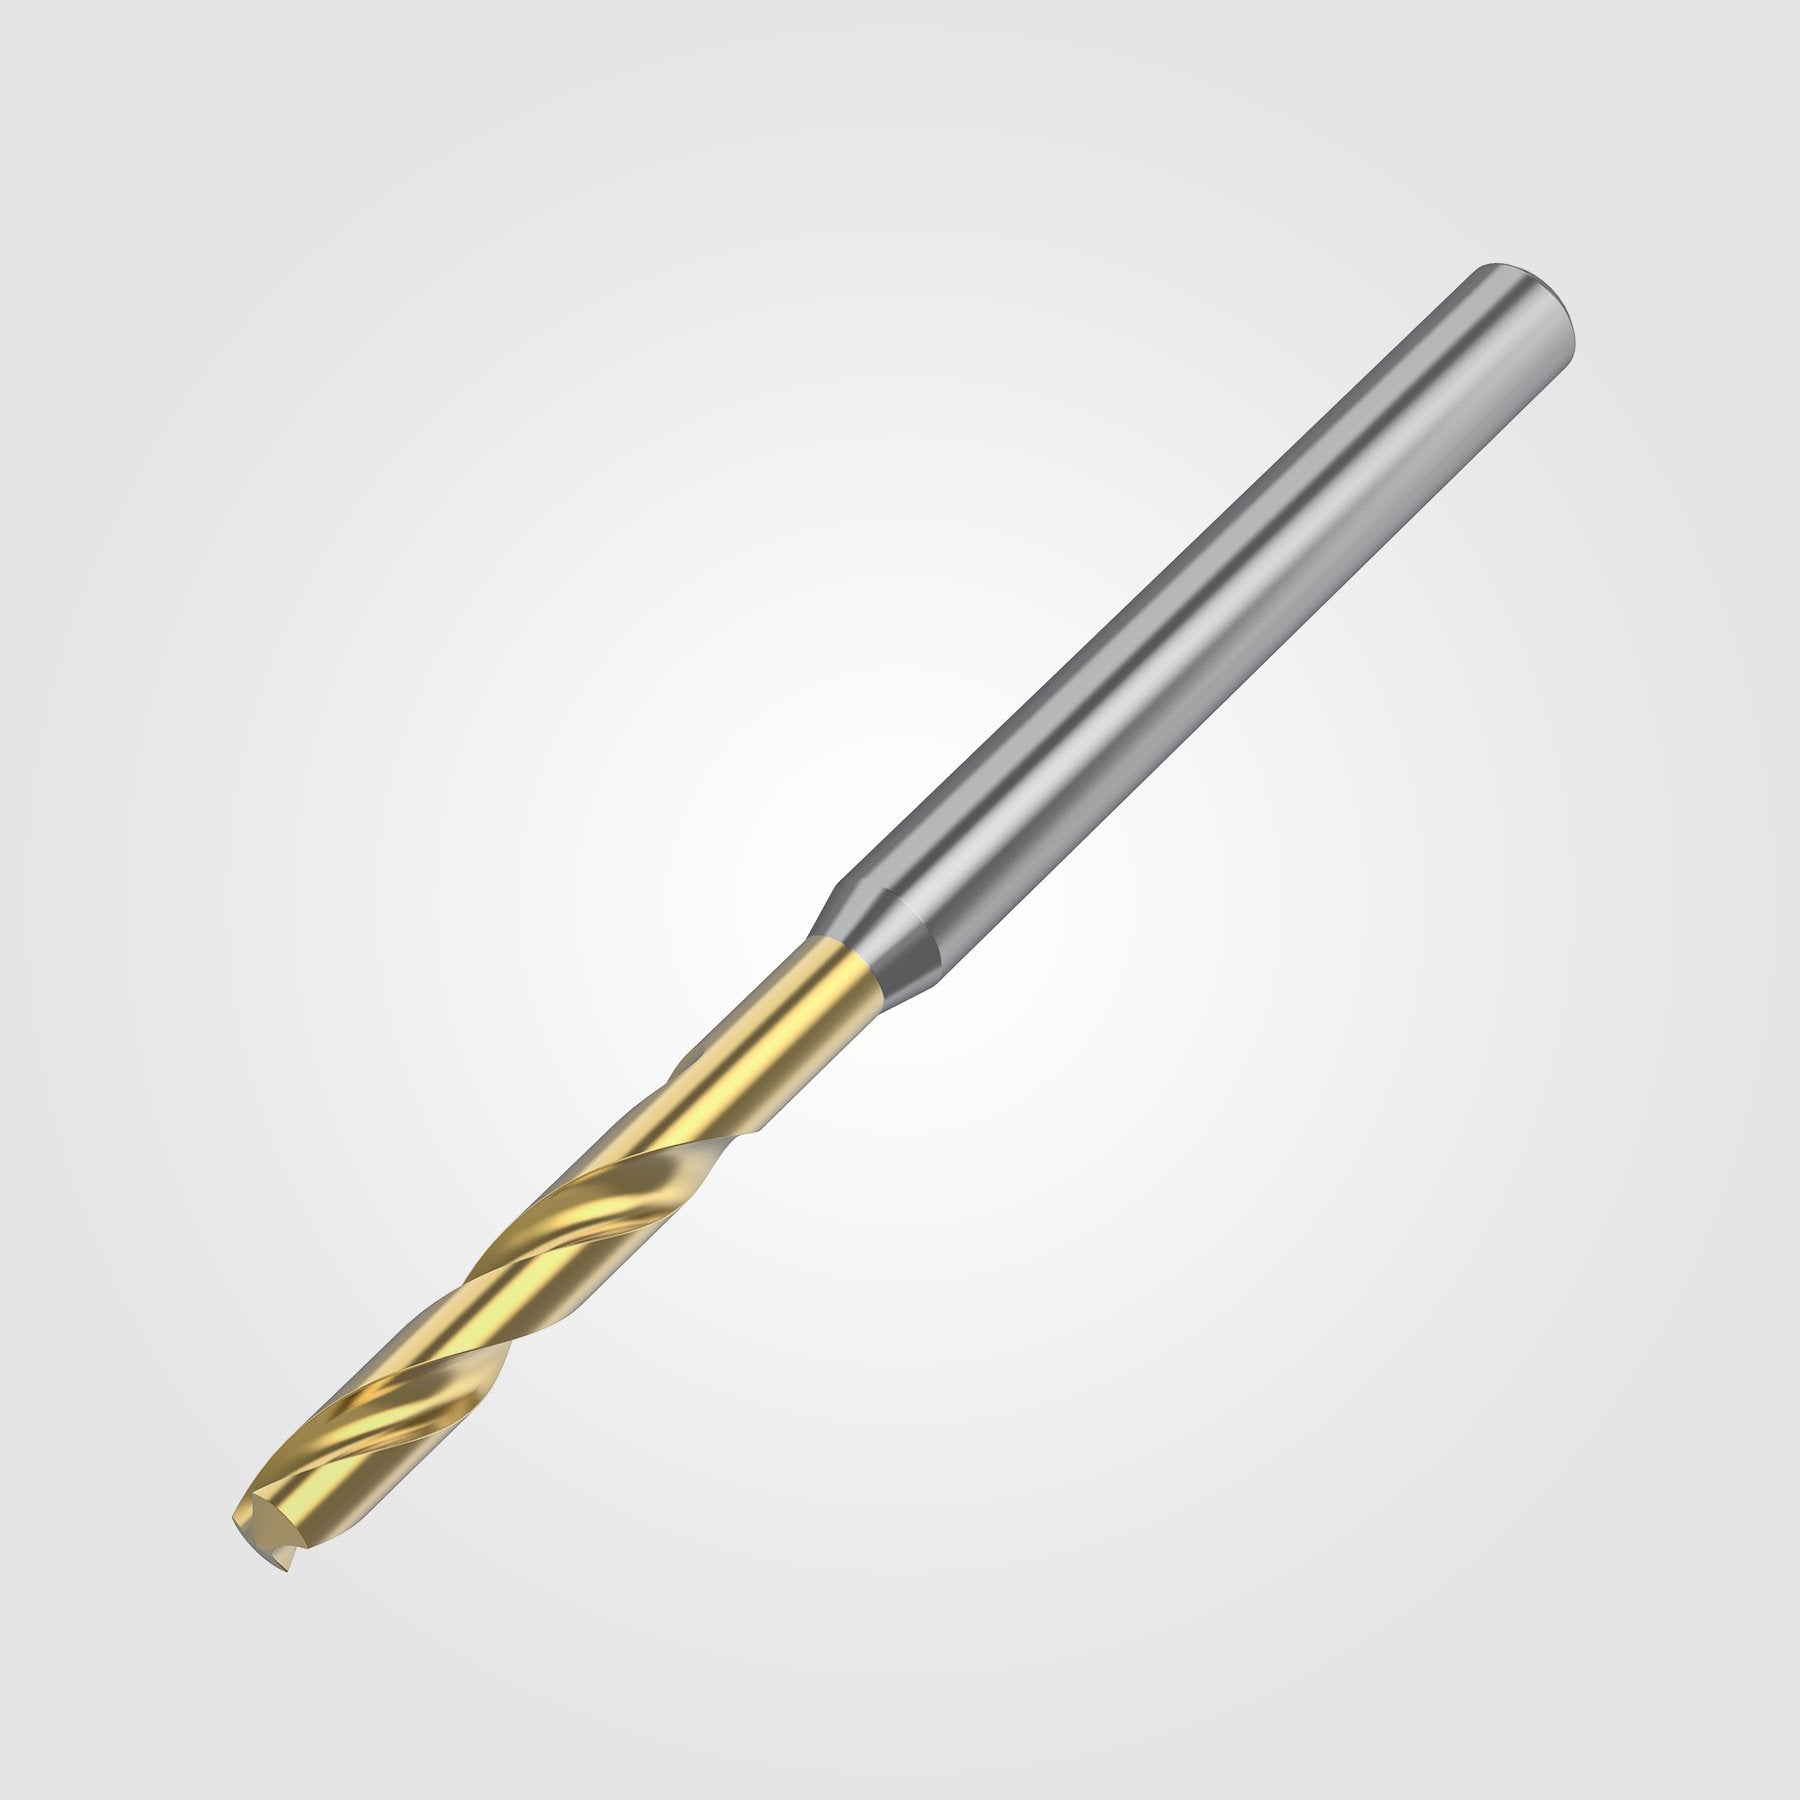 GOdrill (THROUGH COOLANT) | 5.954mm / .2344" / 8xD | SOLID CARBIDE DRILL | 4149640